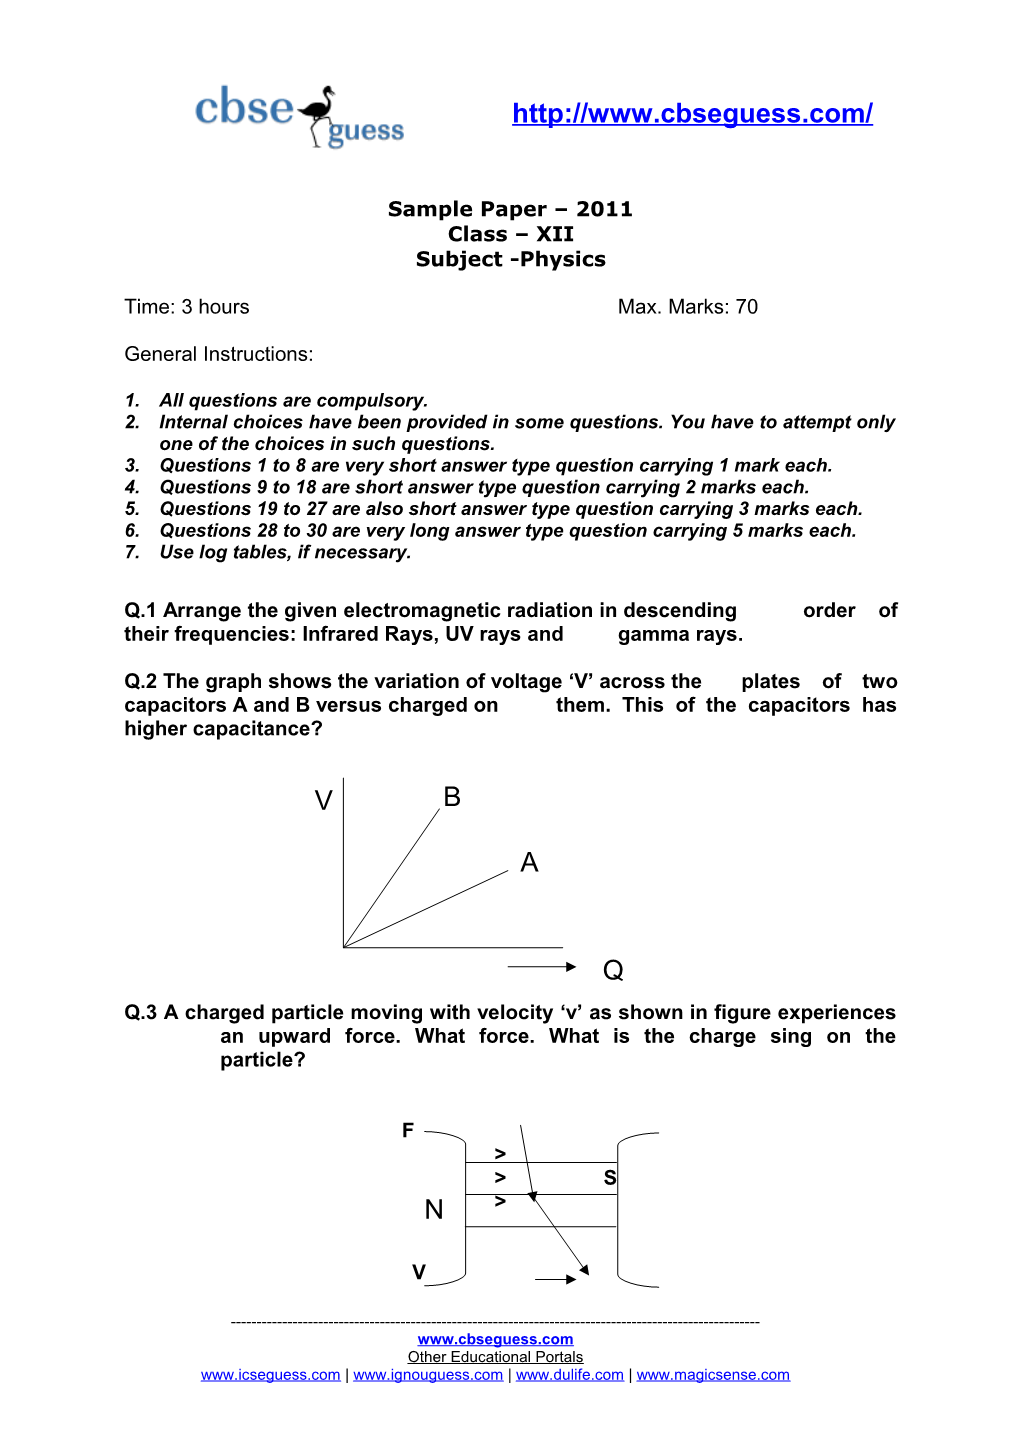 Sample Paper 2011 Class XII Subject -Physics